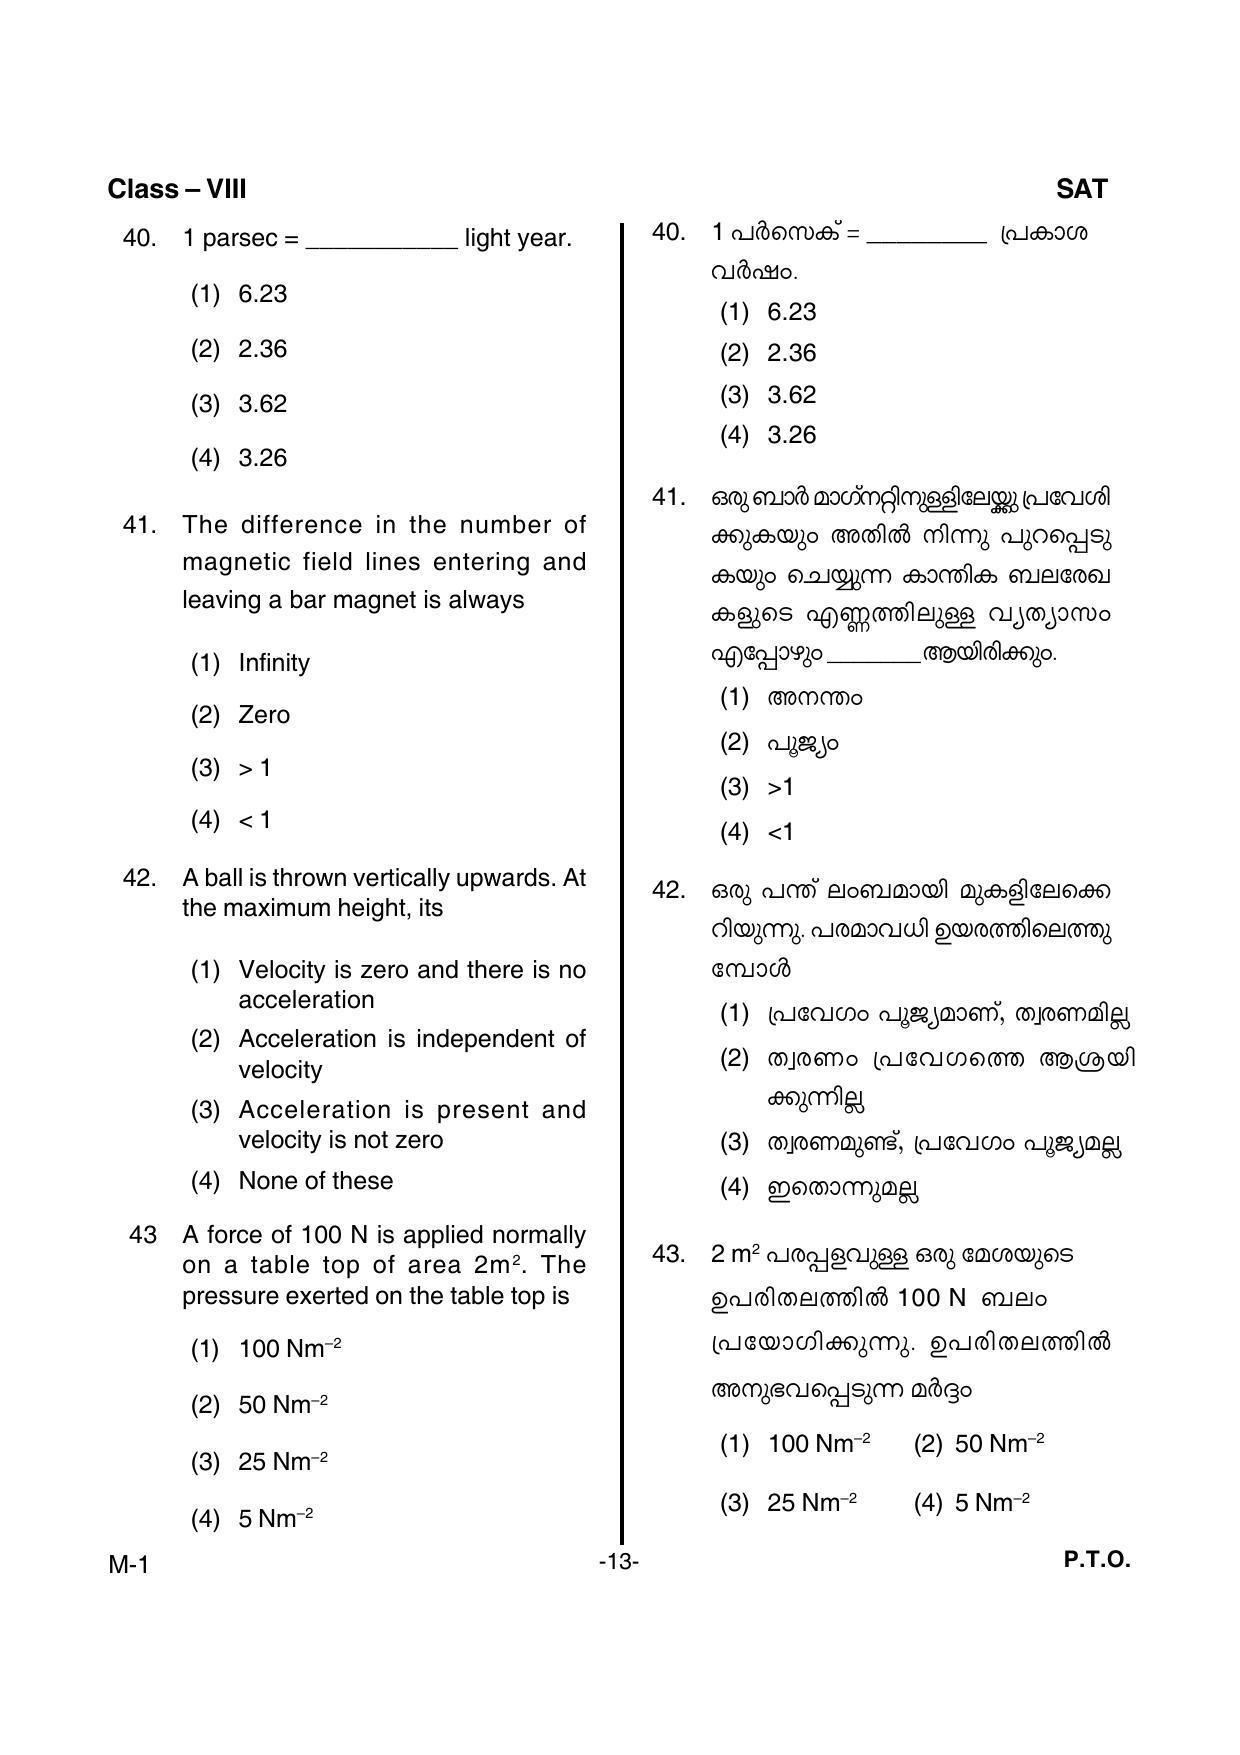 MAT 2016 Class 8 Kerala NMMS Question Papers - Page 15